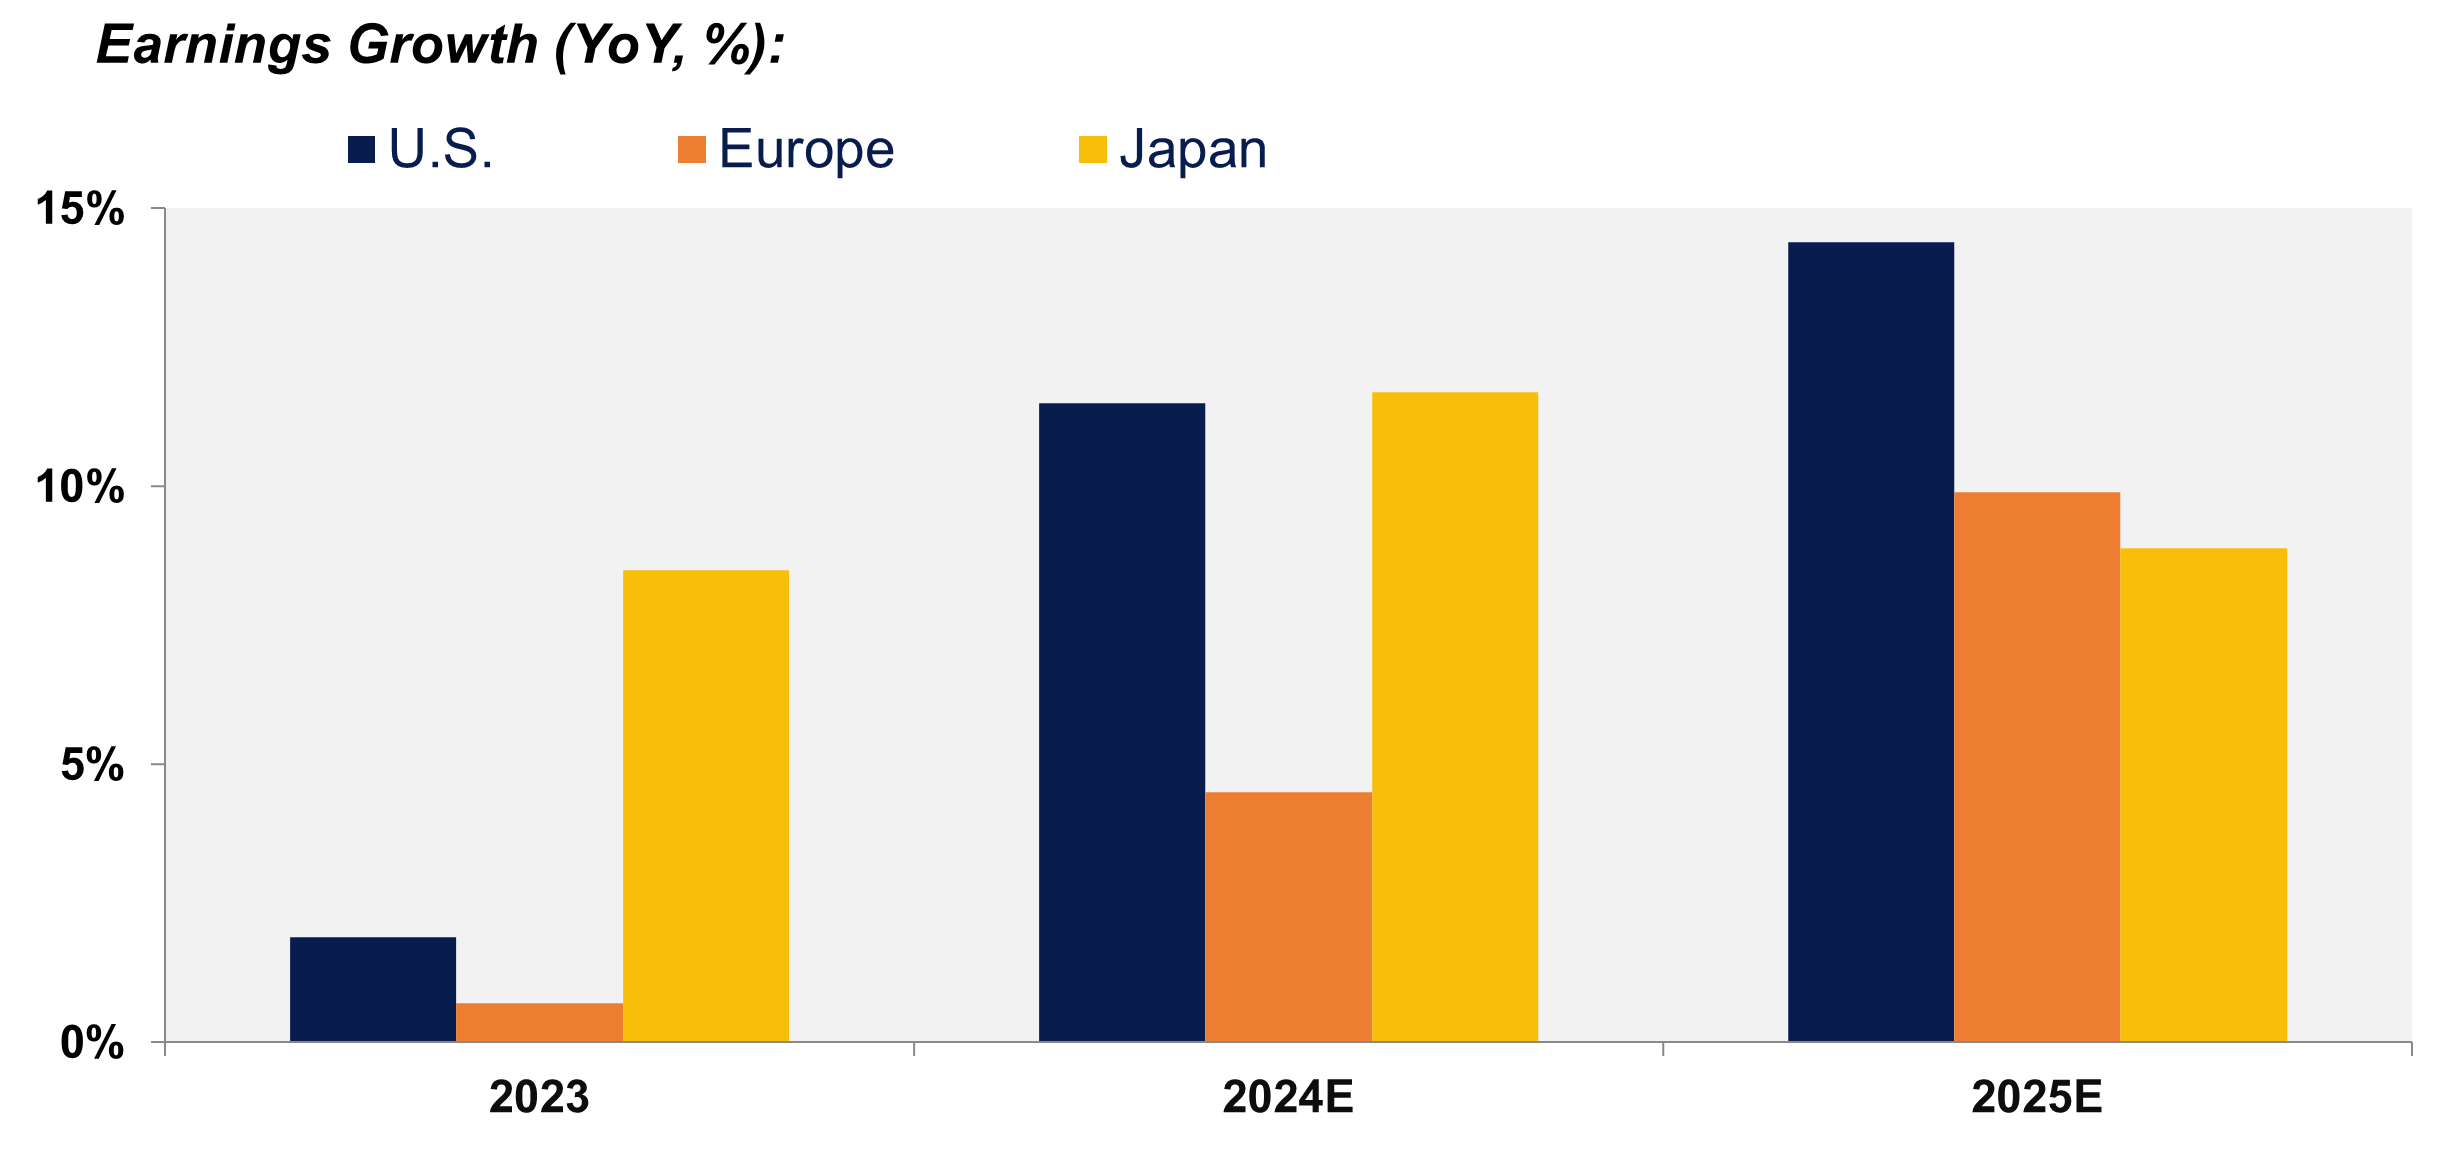 This bar chart shows the earnings growth (year-over-year) for the United States, Europe, and Japan in 2023, 2024E, and 2025E.